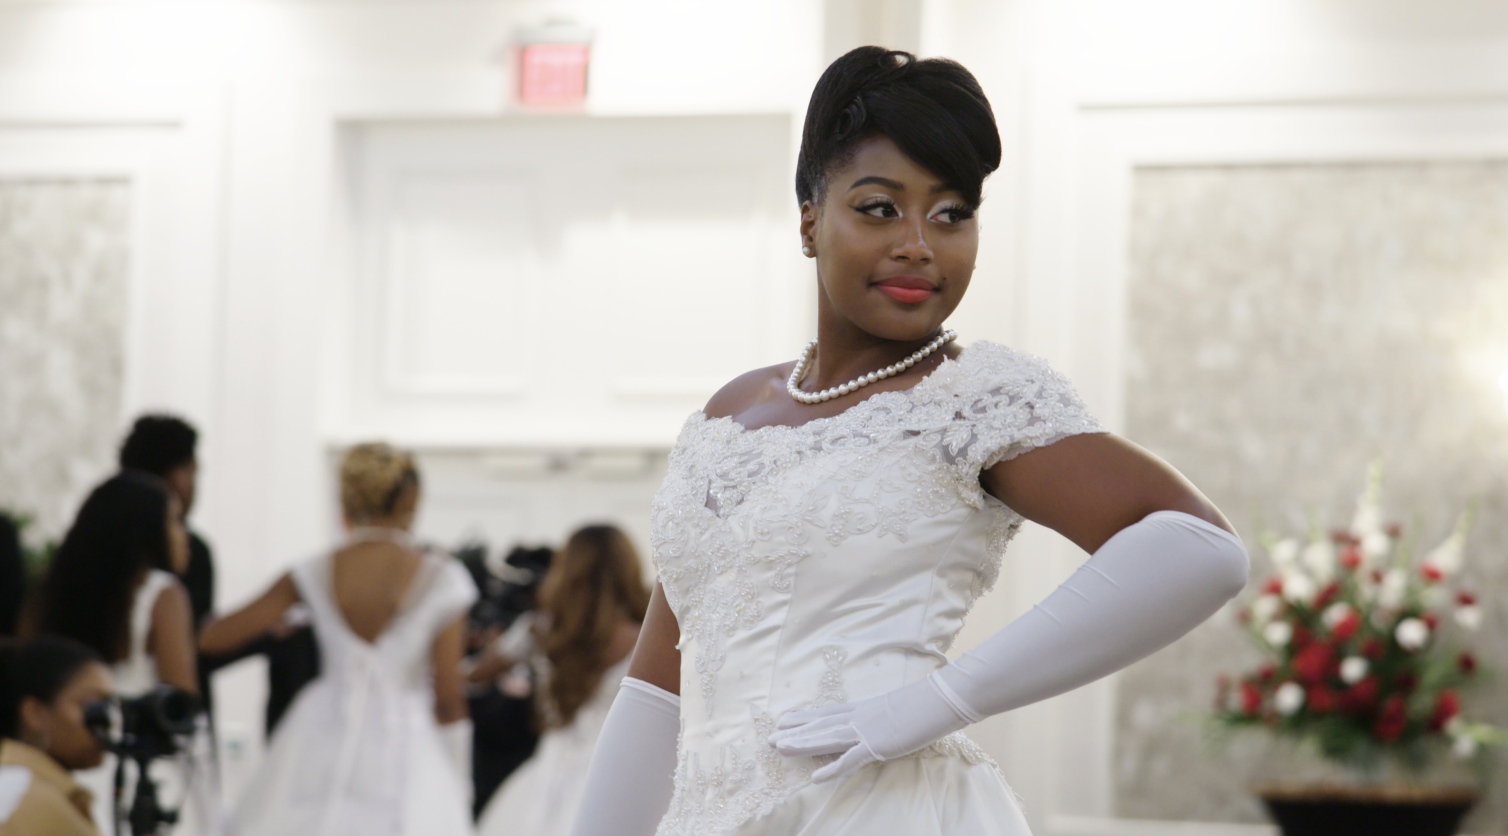 'The Debutantes' Documentary From BET Studios Also Serves As A 'Black Girl Coming-Of-Age Story,' Says Director